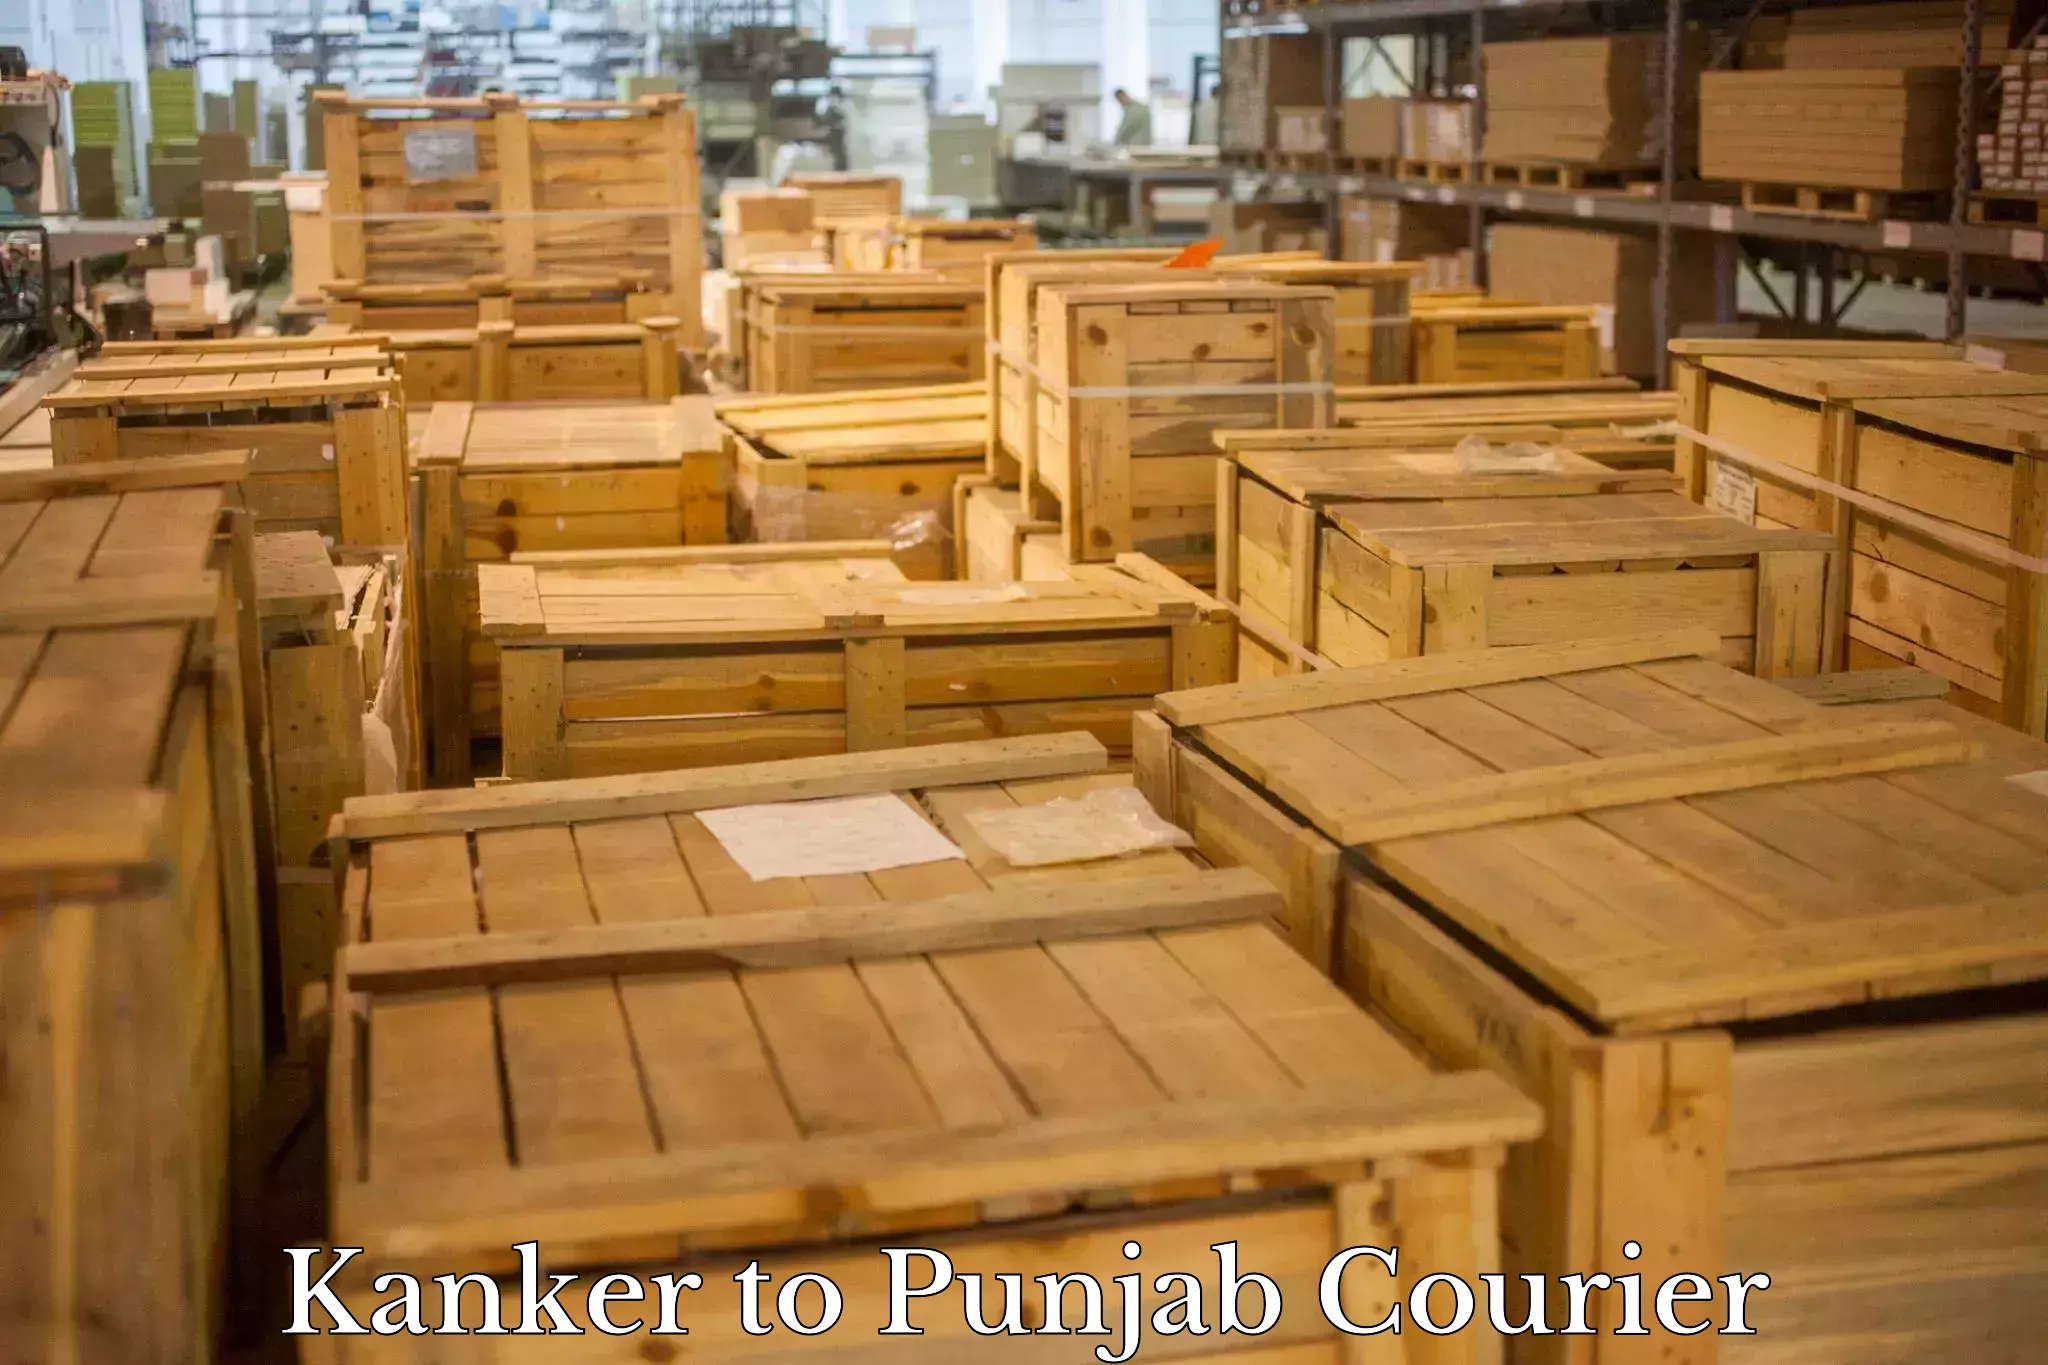 Weekend courier service Kanker to Punjab